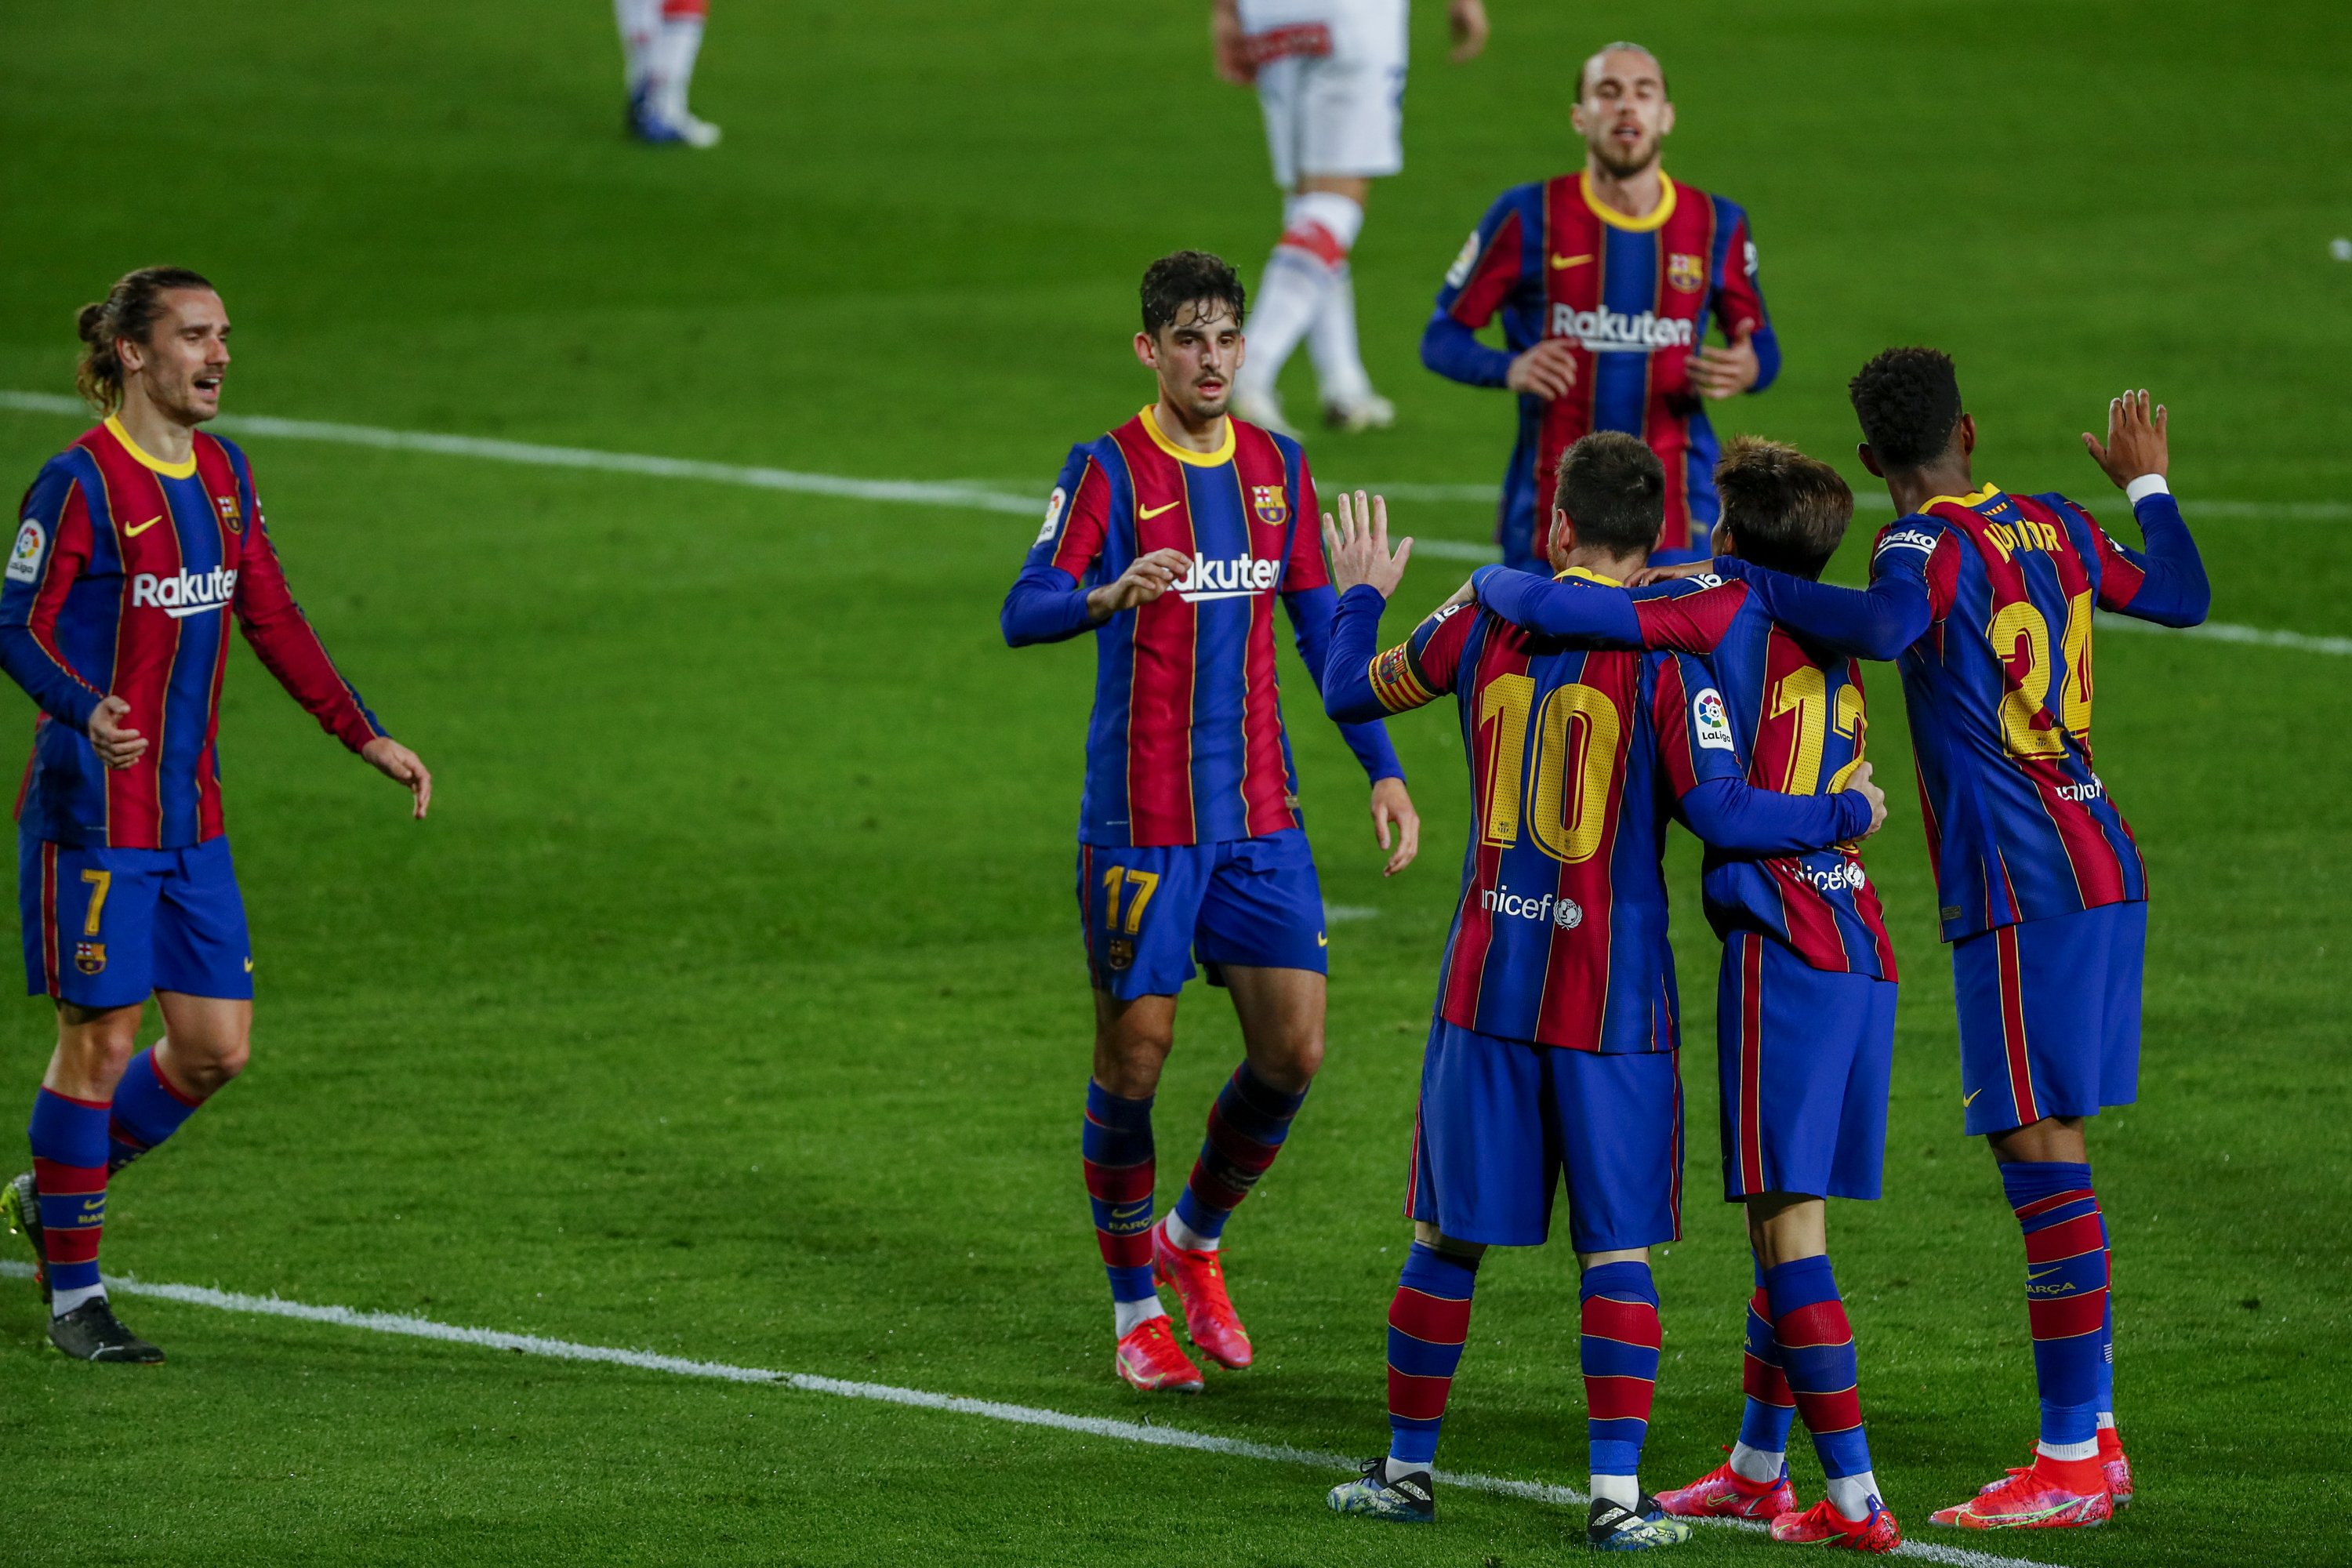 Barcelona meets PSG for 1st time since epic 61 comeback win